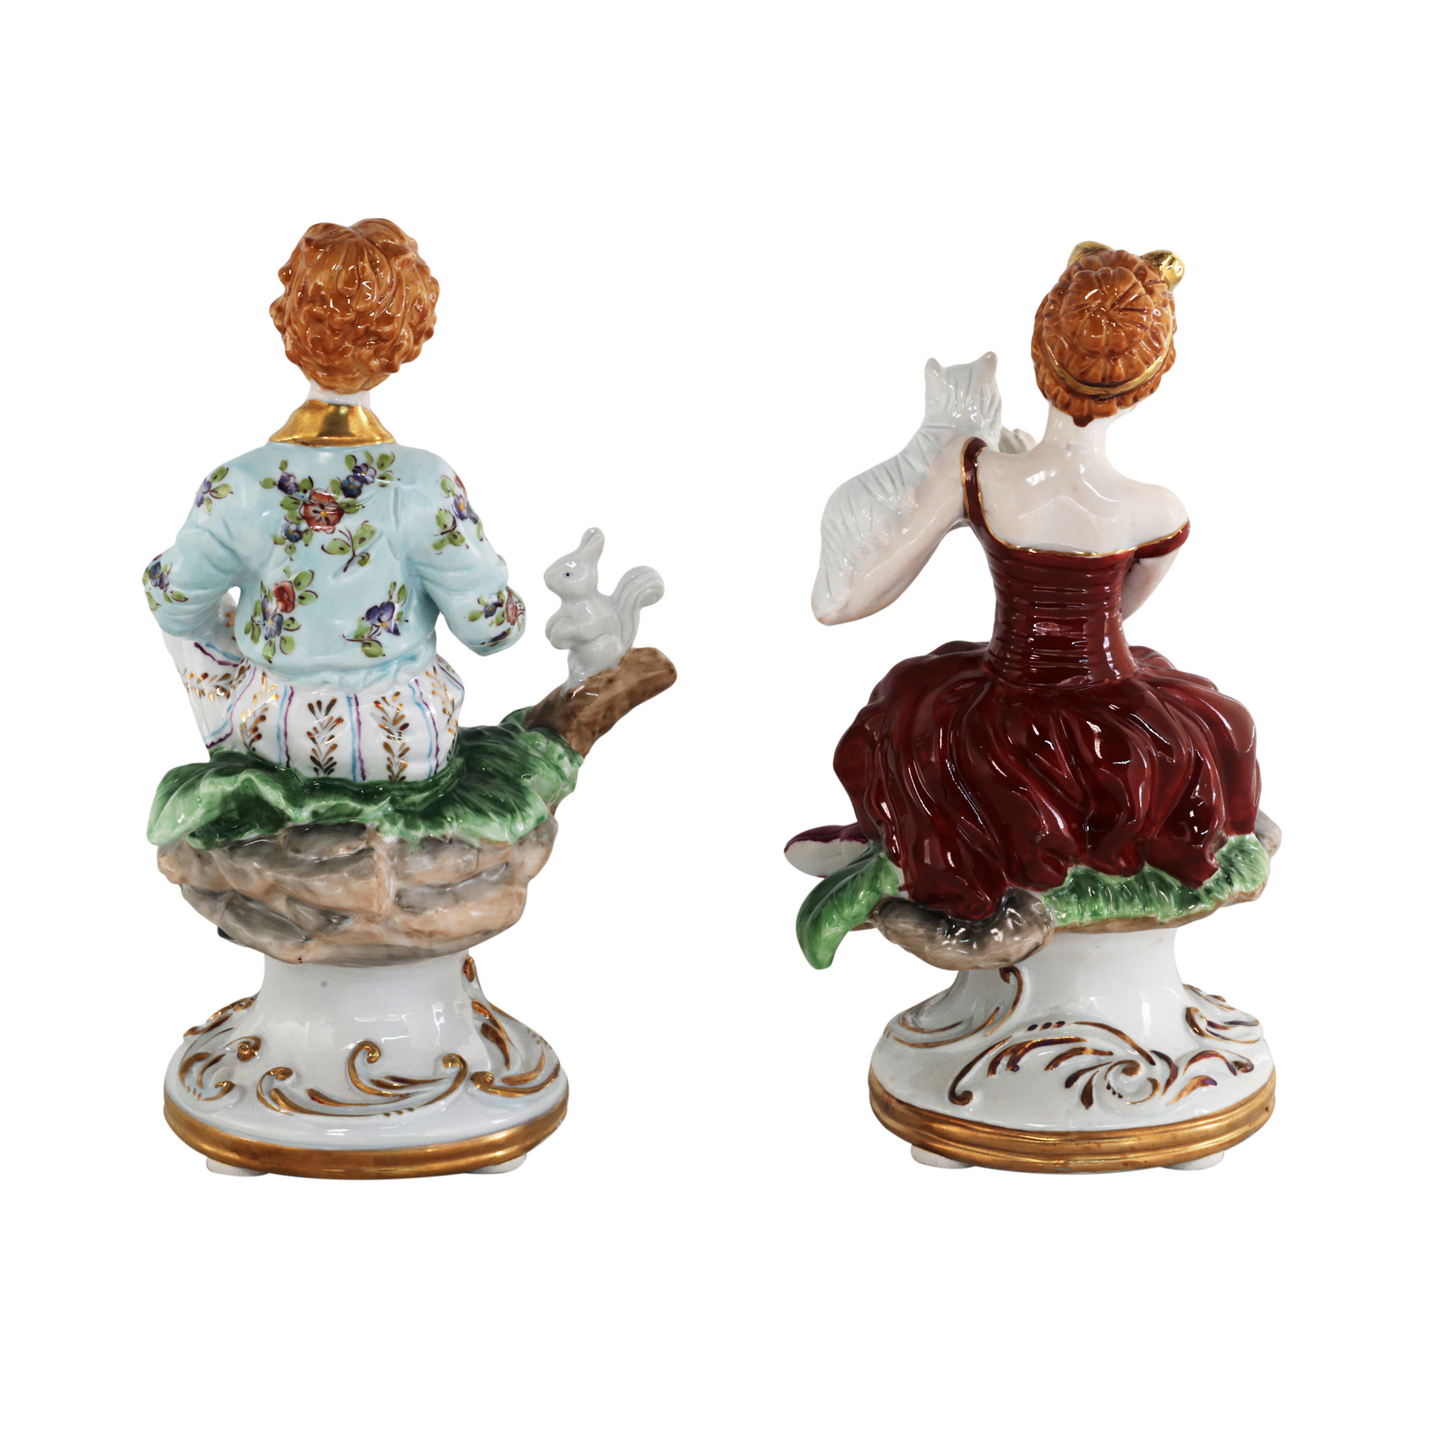 Rococo Style Porcelain Young Girl & Boy Figurine Pair